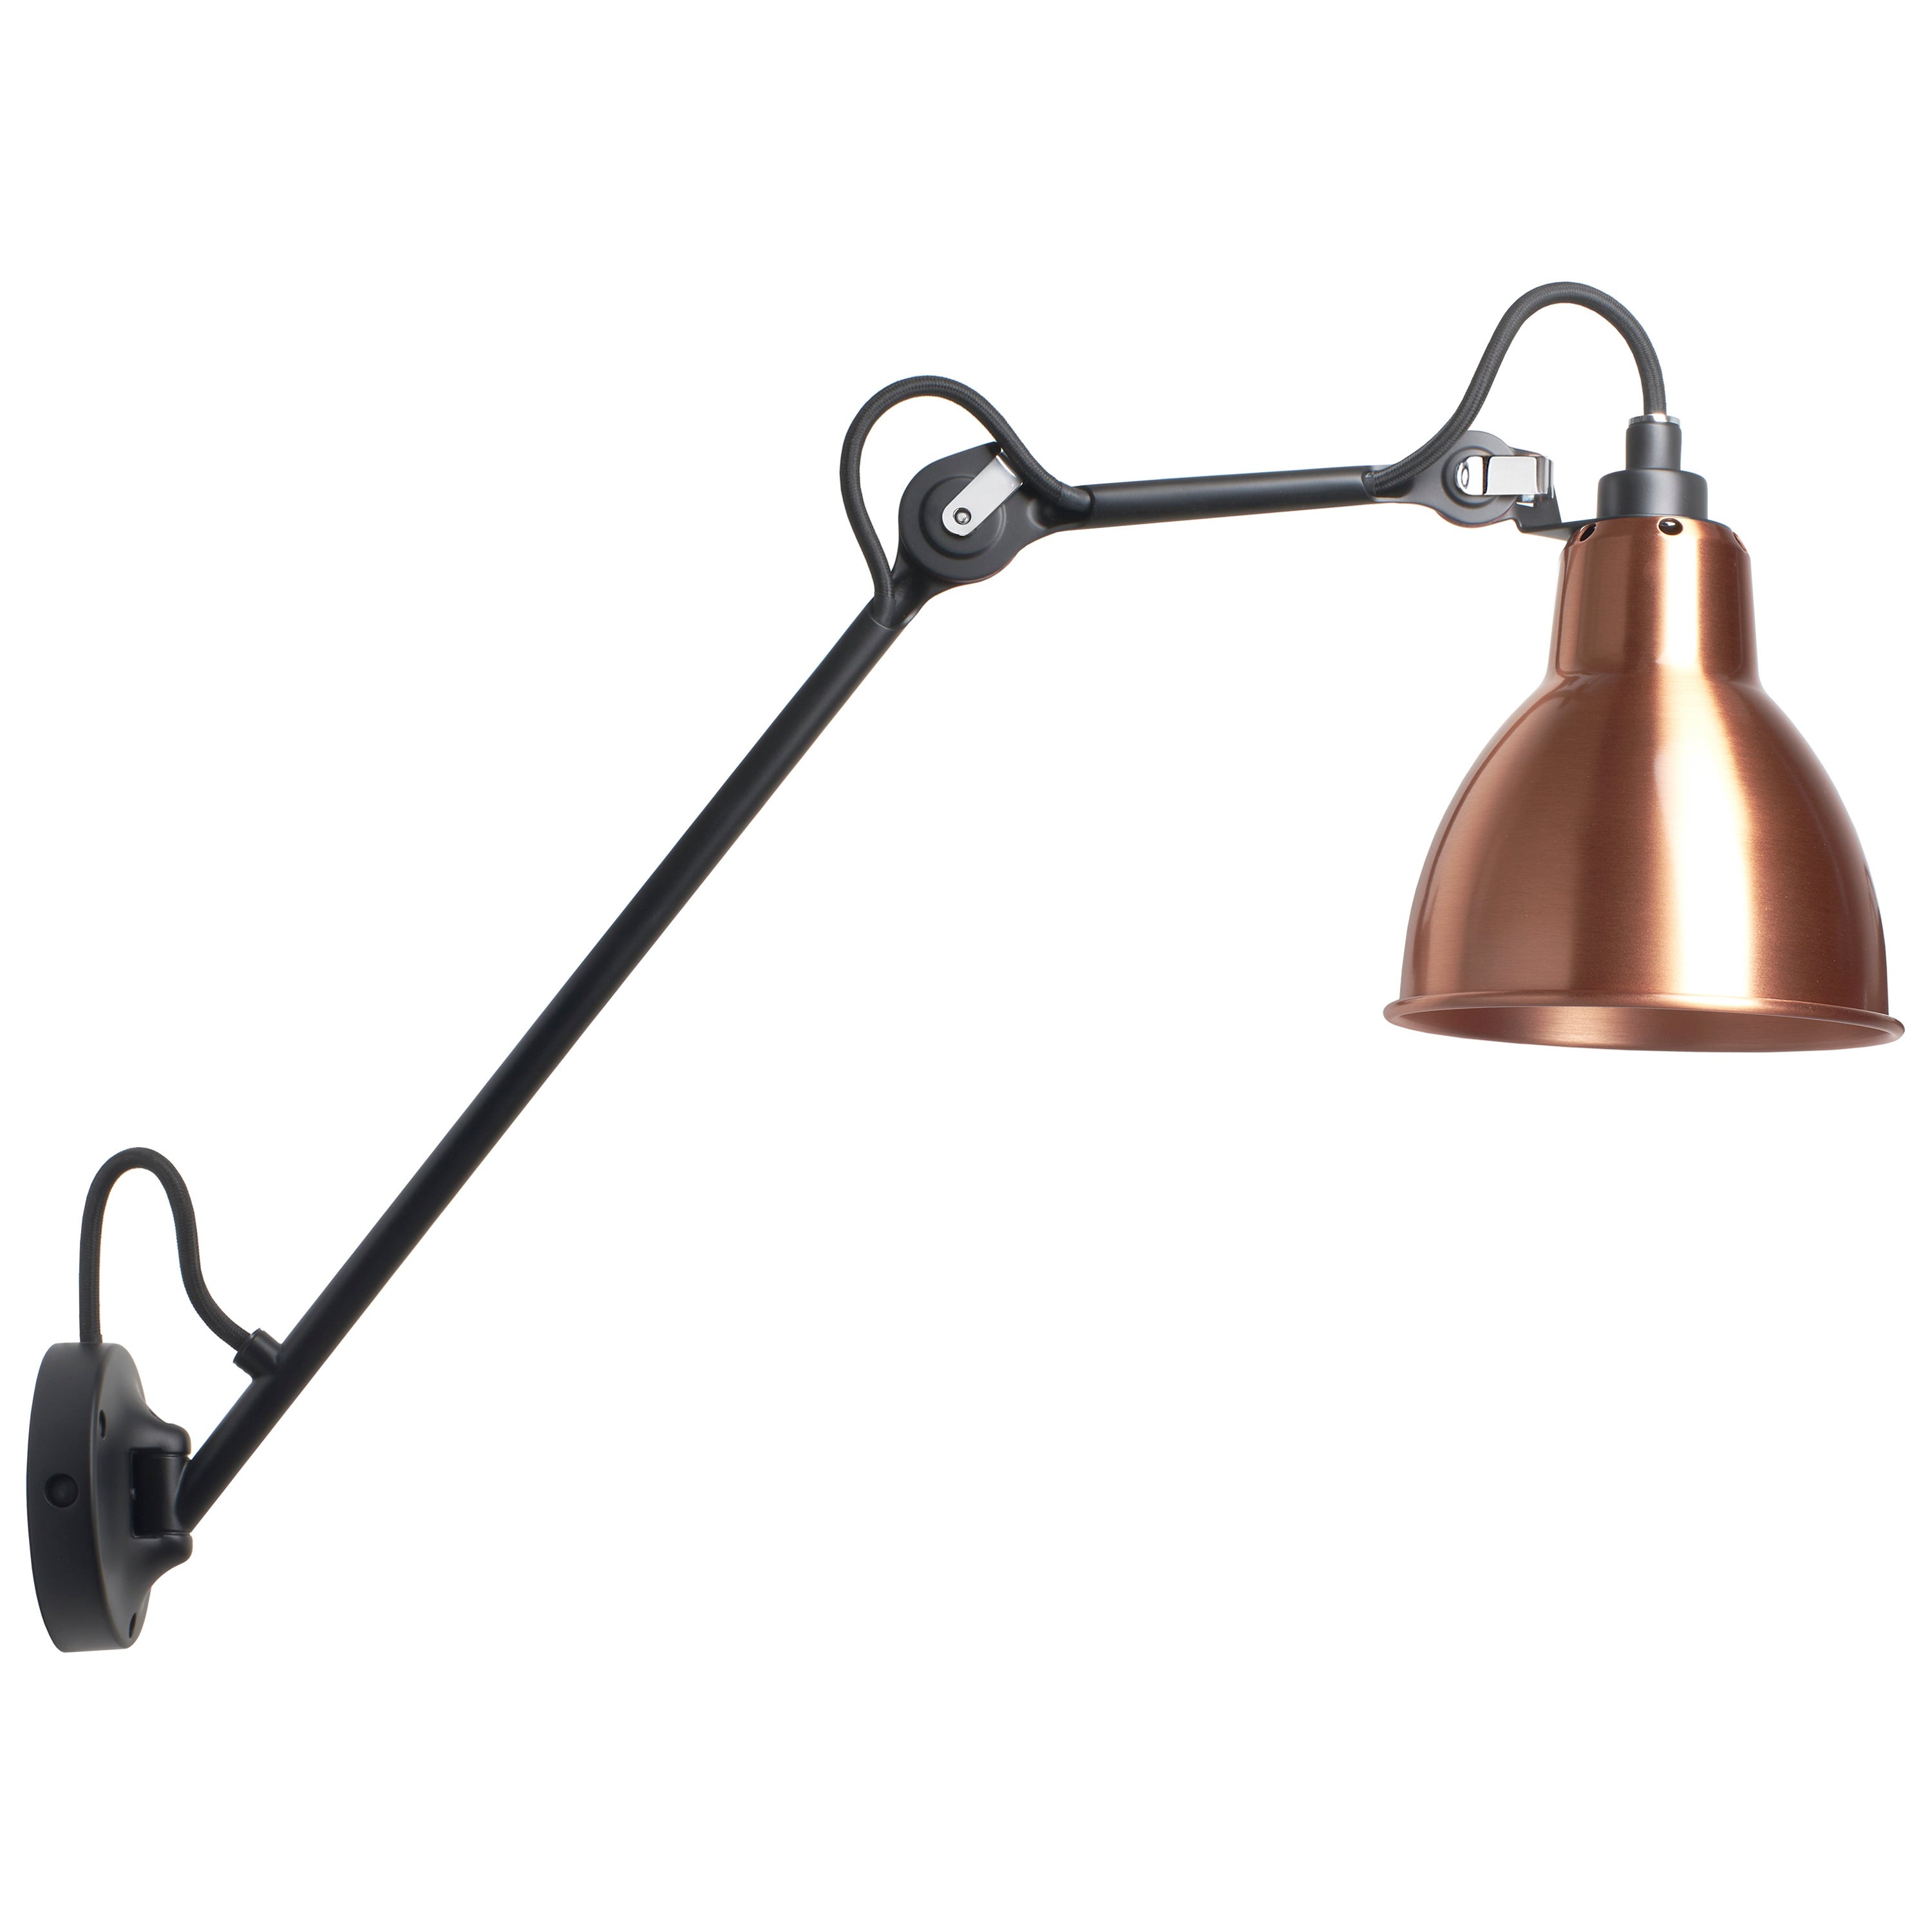 DCW Editions La Lampe Gras N°122 Wall Lamp in Black Arm and Copper Shade